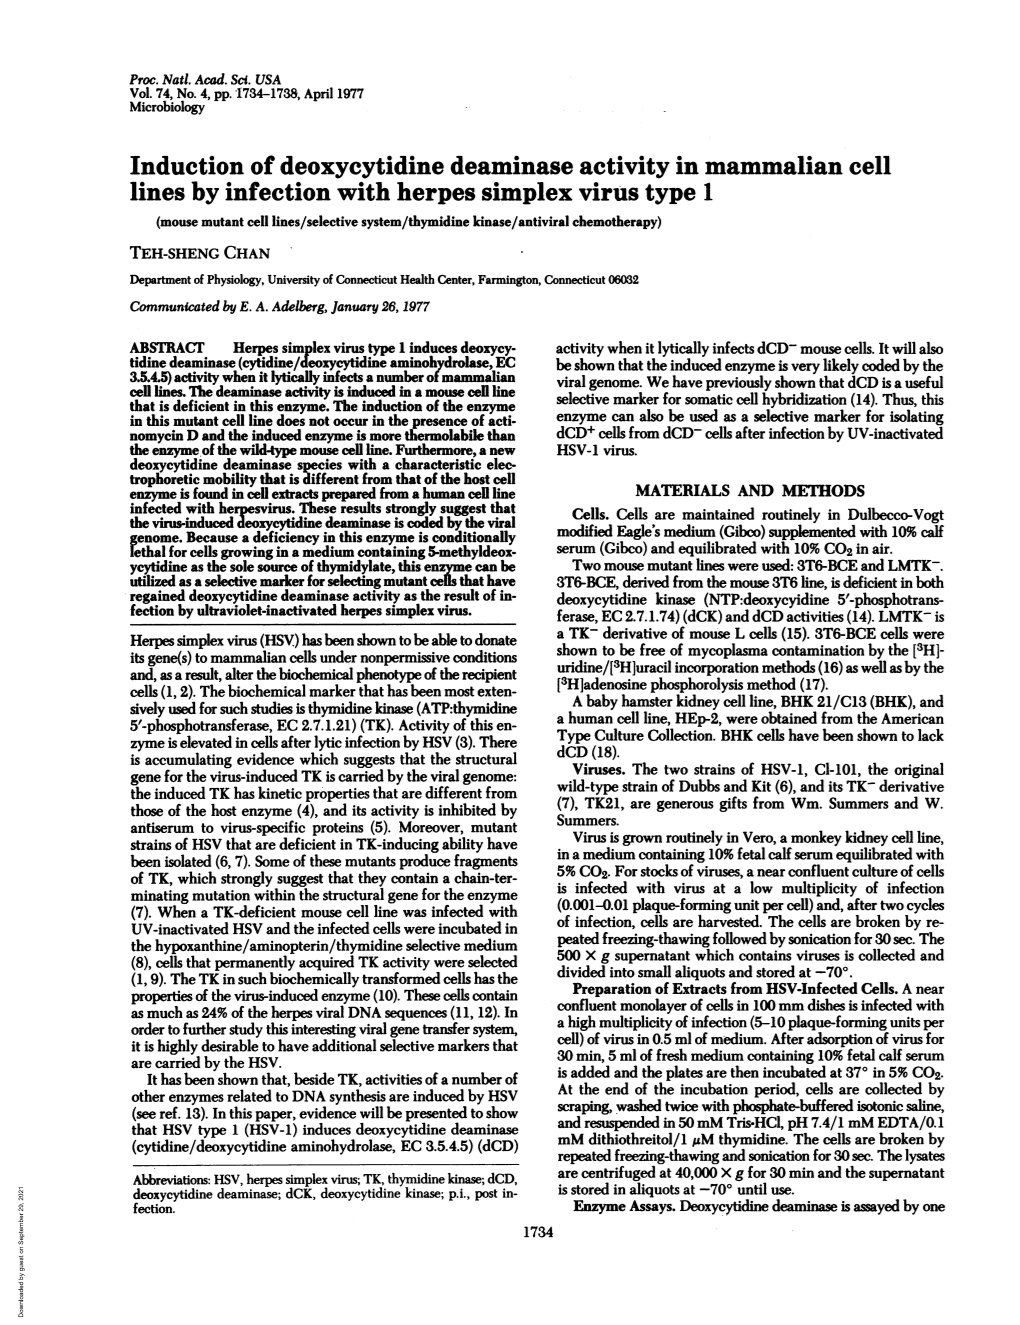 Induction of Deoxycytidine Deaminase Activity in Mammalian Cell Lines By